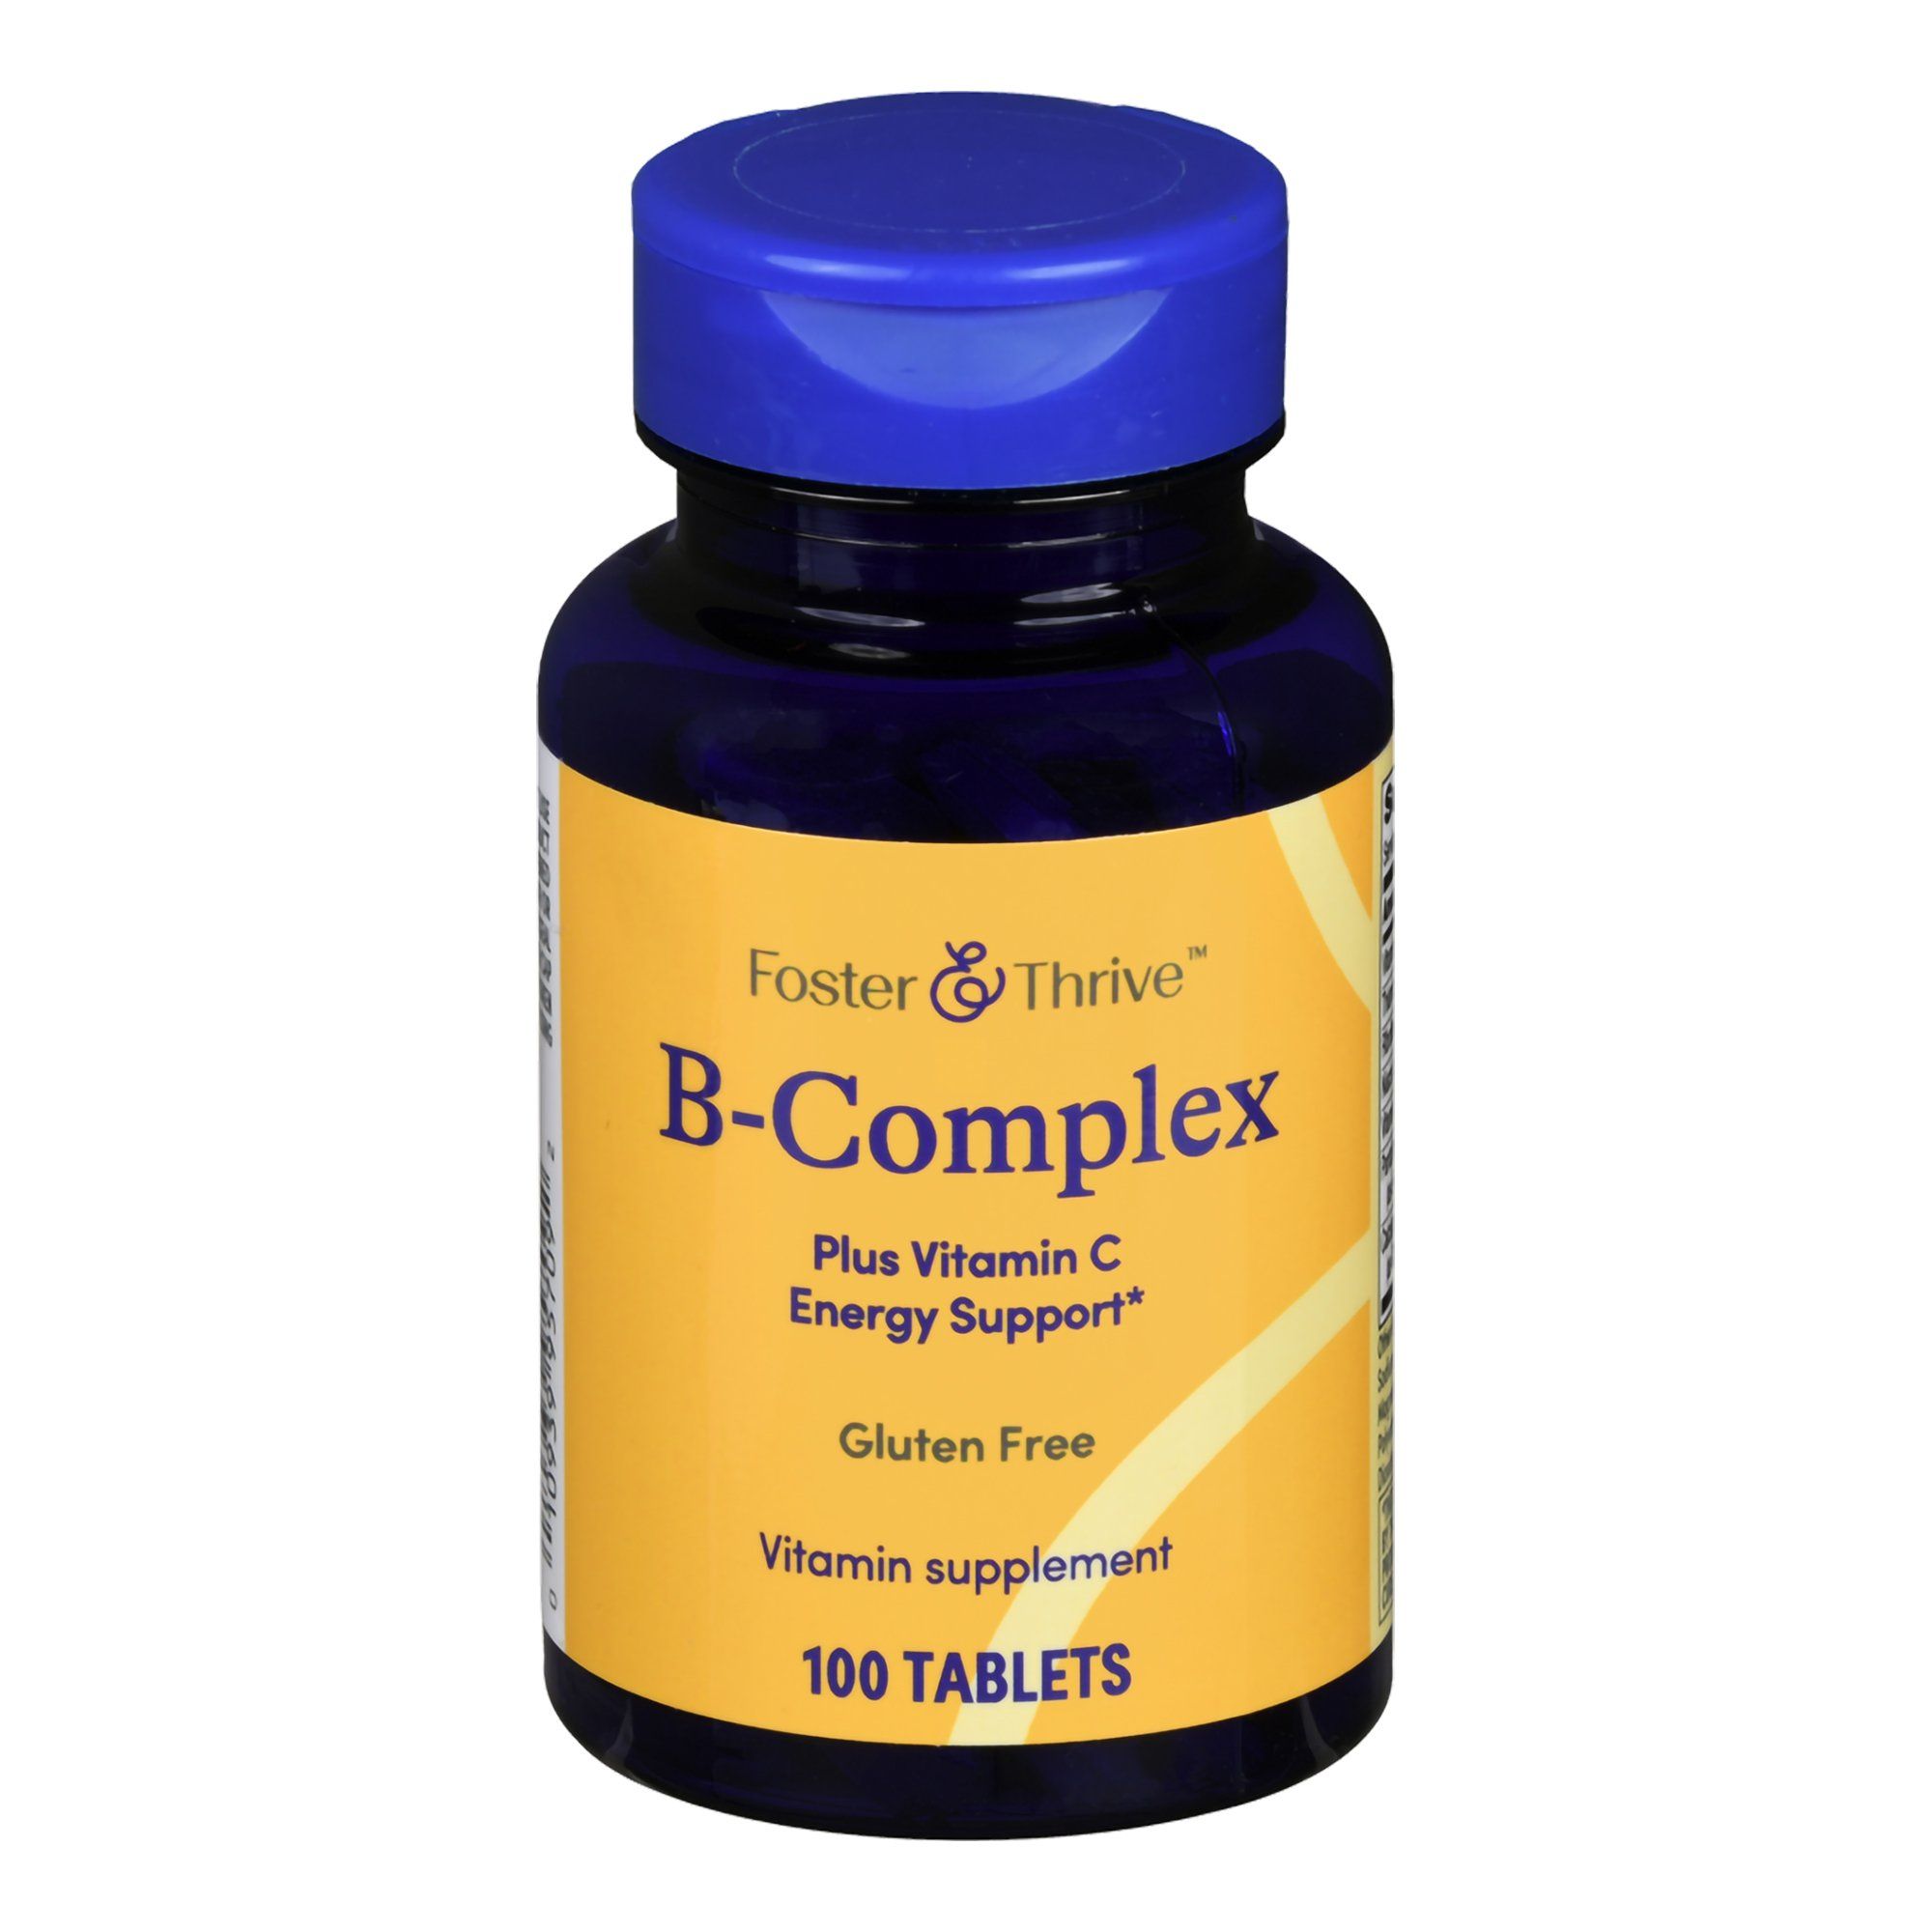 Foster & Thrive B-Complex Tablets - 100 ct